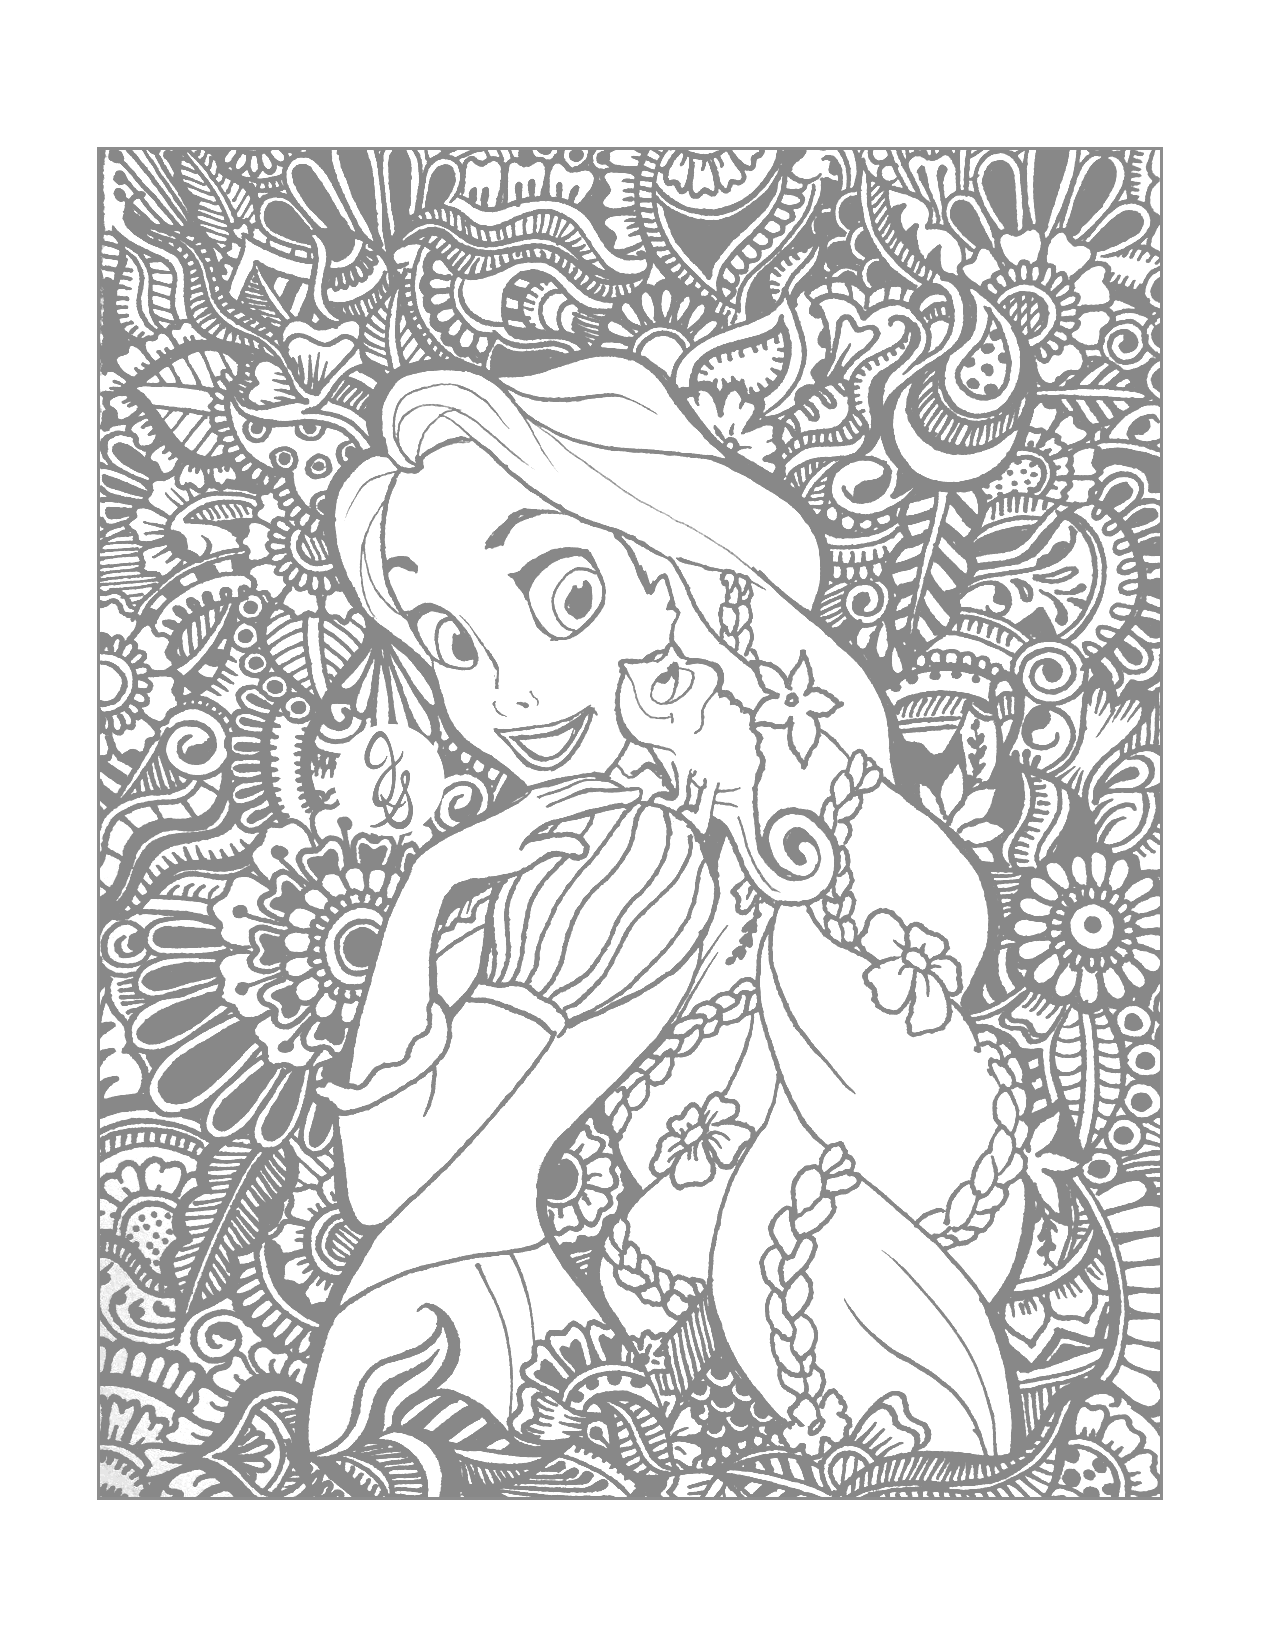 Tangled Tracing And Coloring Page For Adults